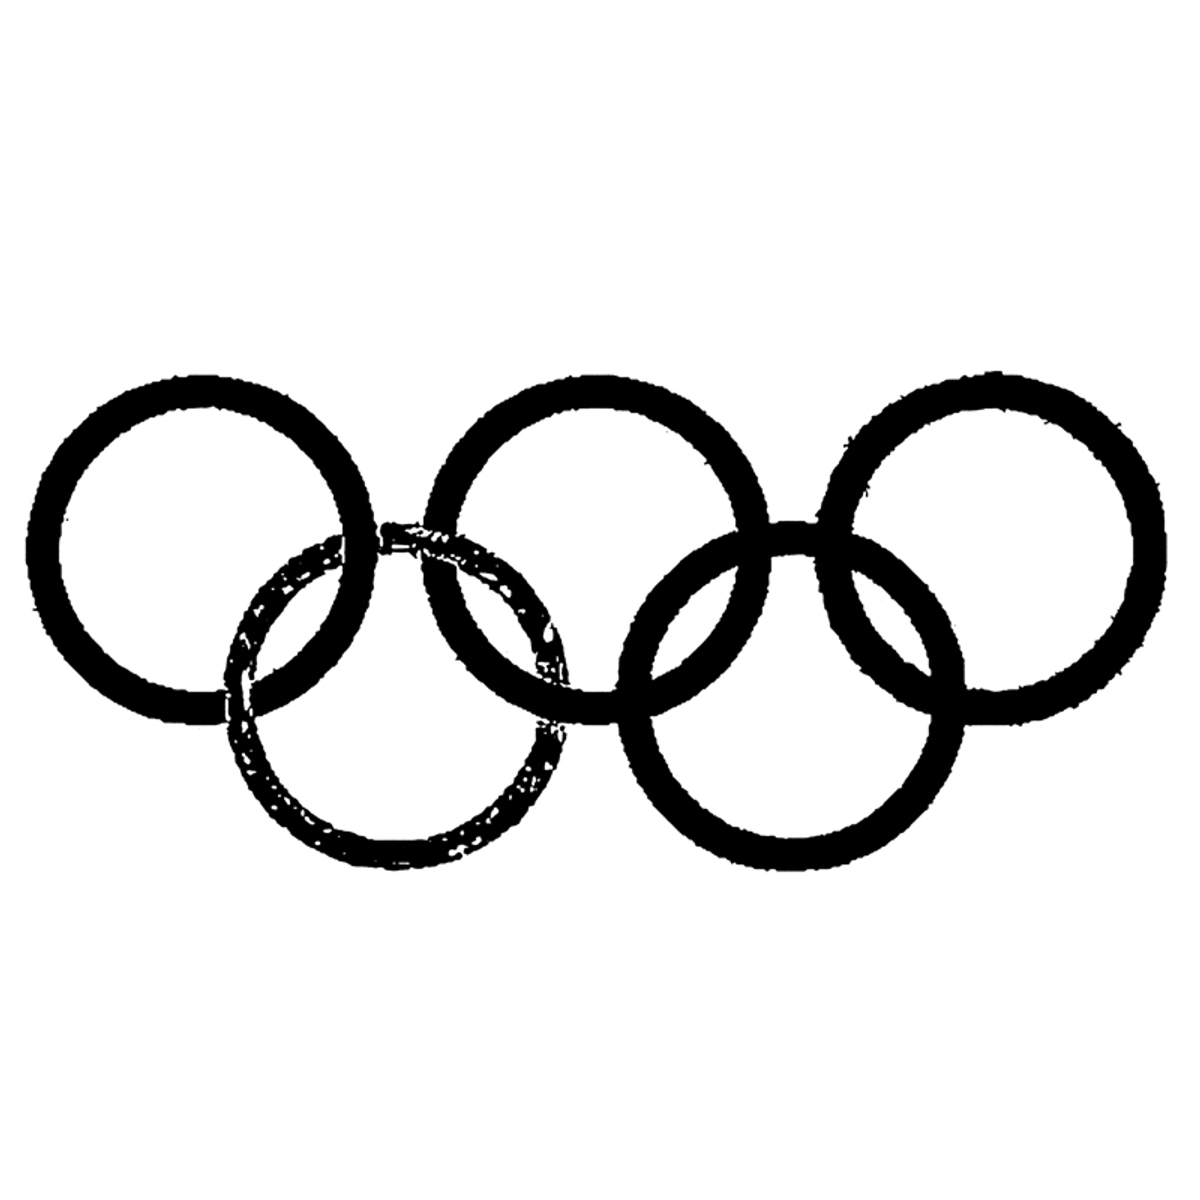 1914, creation of the Olympic rings symbols